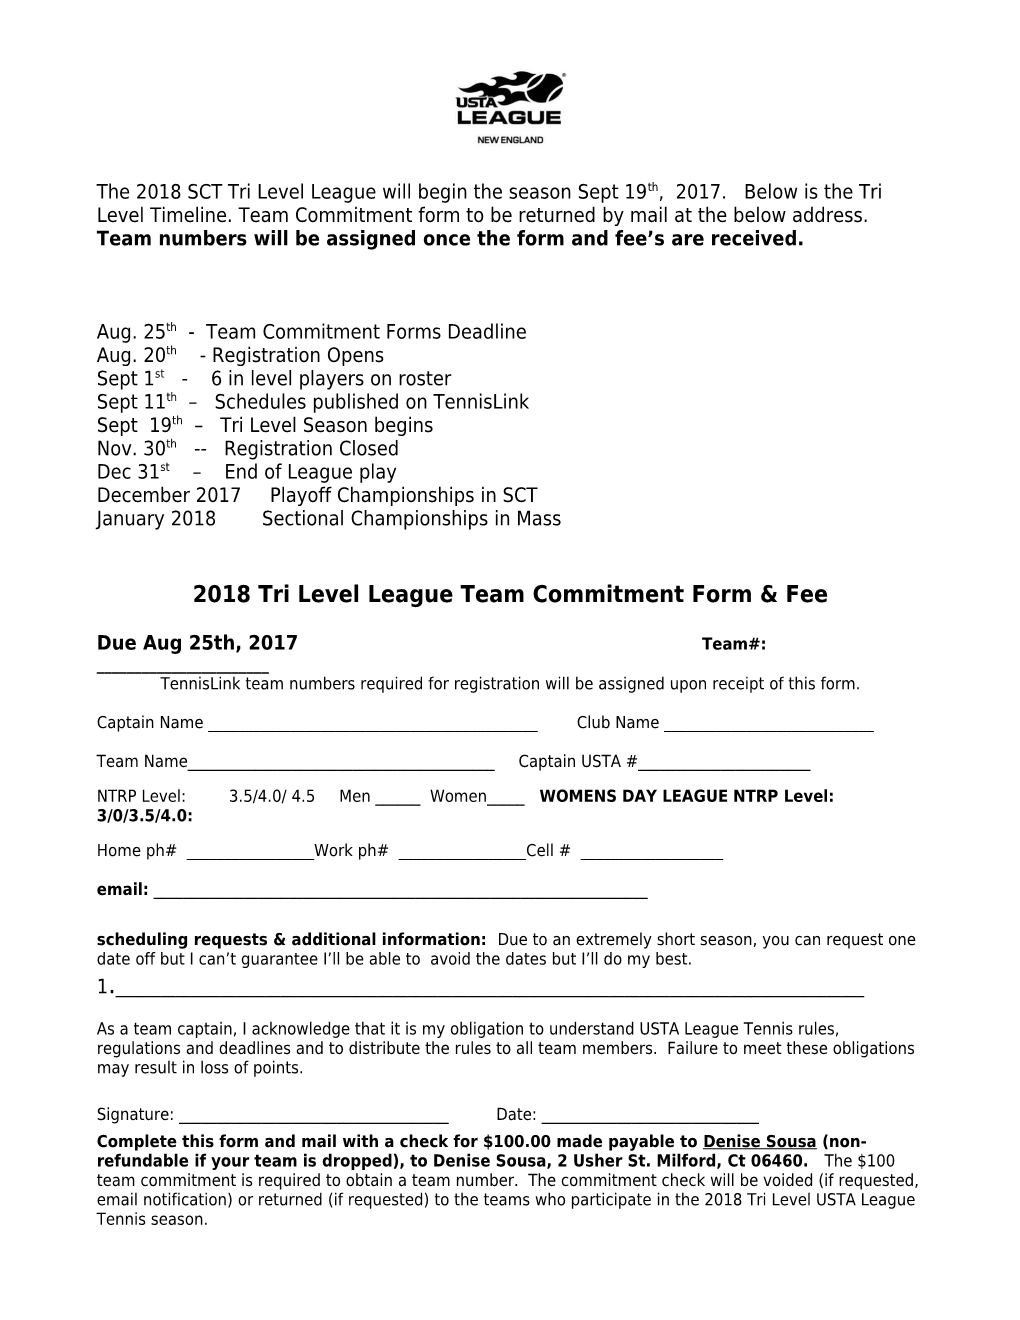 Aug. 25Th - Team Commitment Forms Deadline